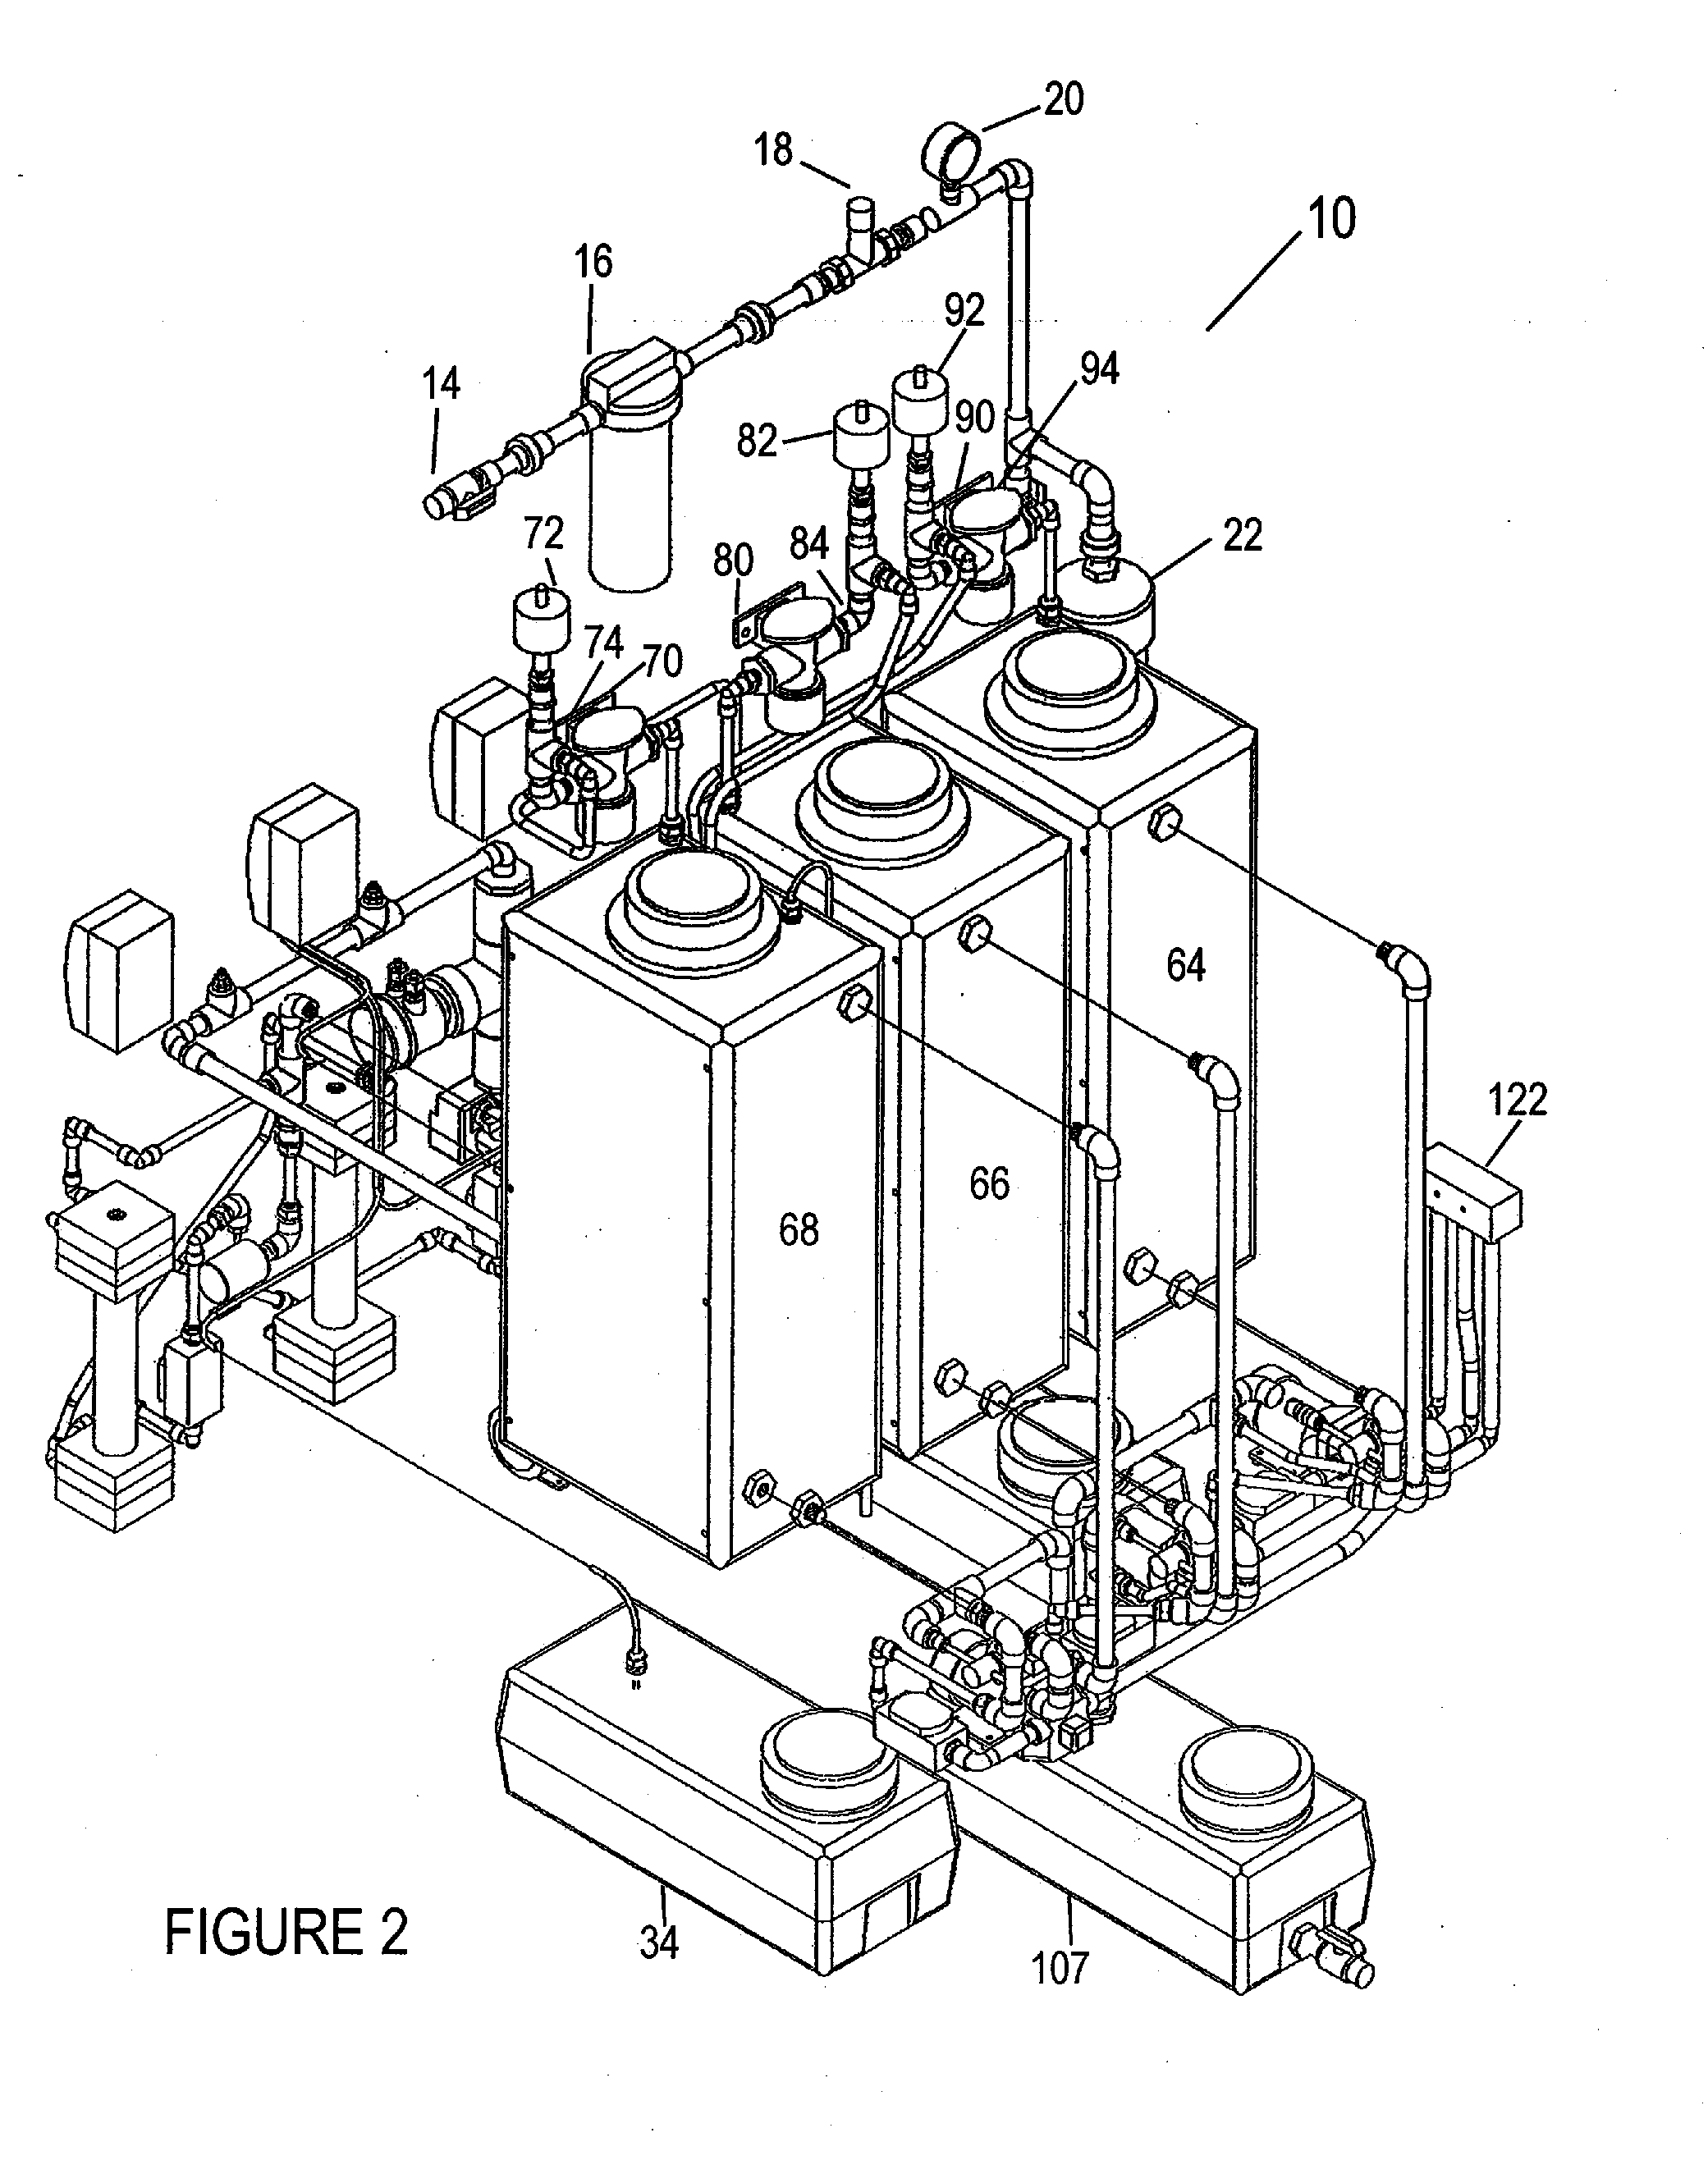 Novel apparatus and methods to improve infection control in facilities